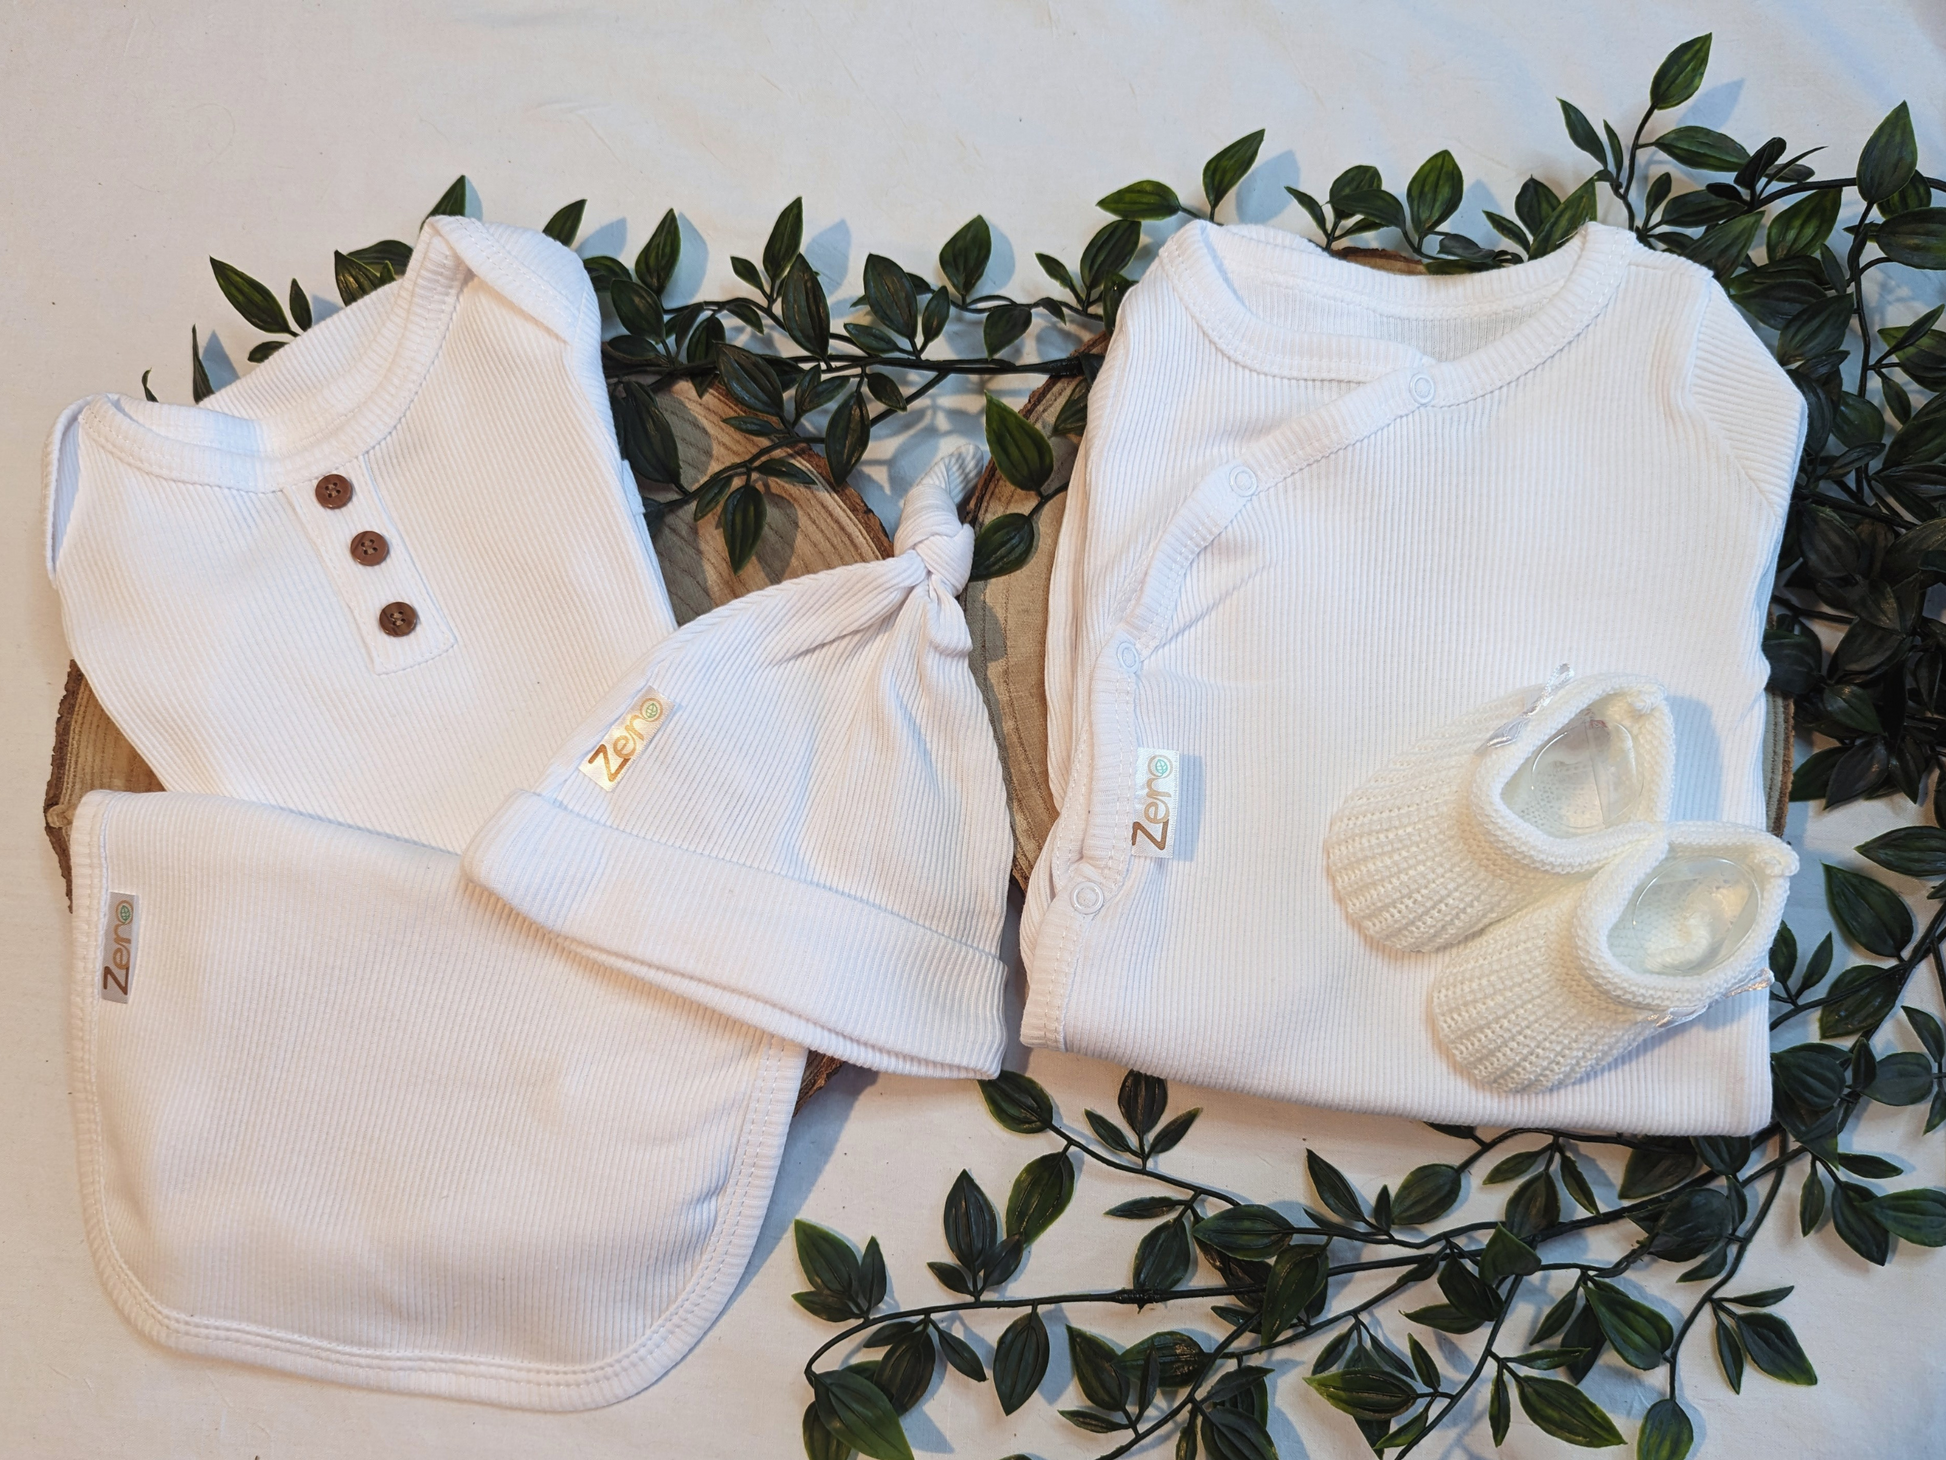 Unisex newborn clothes - Baby sleepsuit in white, made from eco friendly materials featuring a ribbed textured design. (Featured with other complementing unisex newborn baby clothing and accessories: Baby bib, hat, bodysuit and booties all in white, available at LoobyLu Baby.  